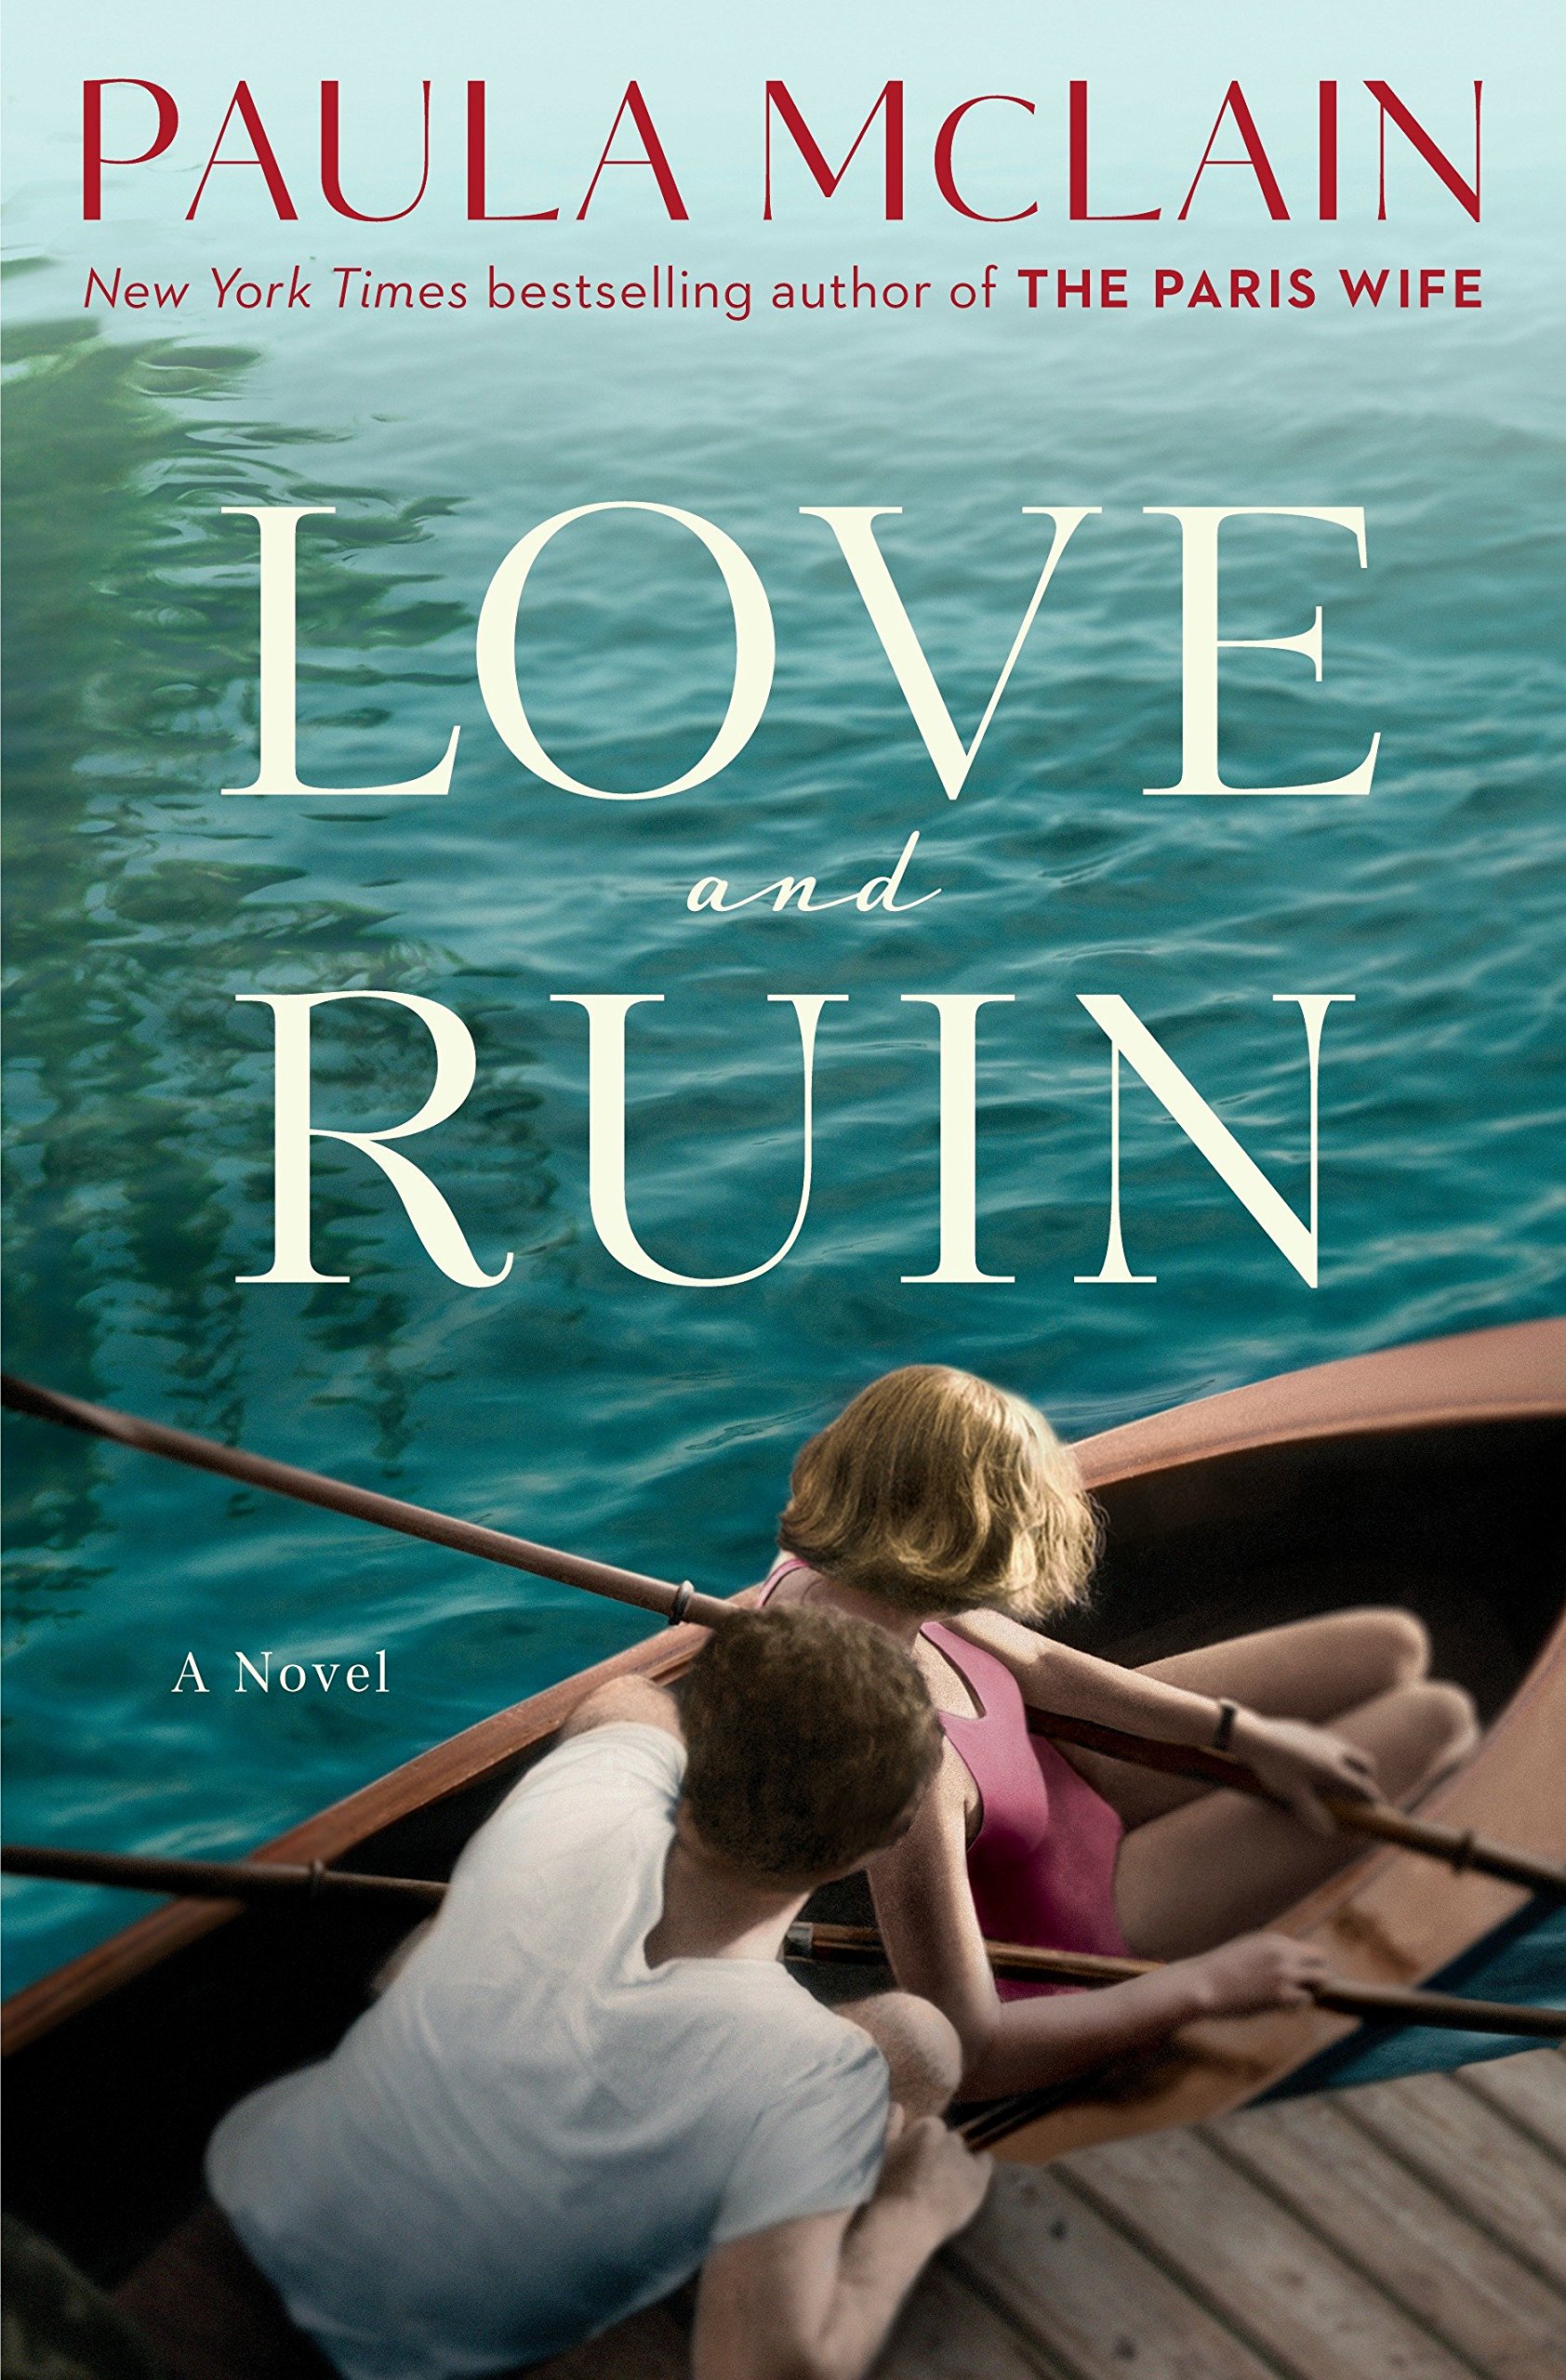 The cover of Love and Ruin by Paula McLain